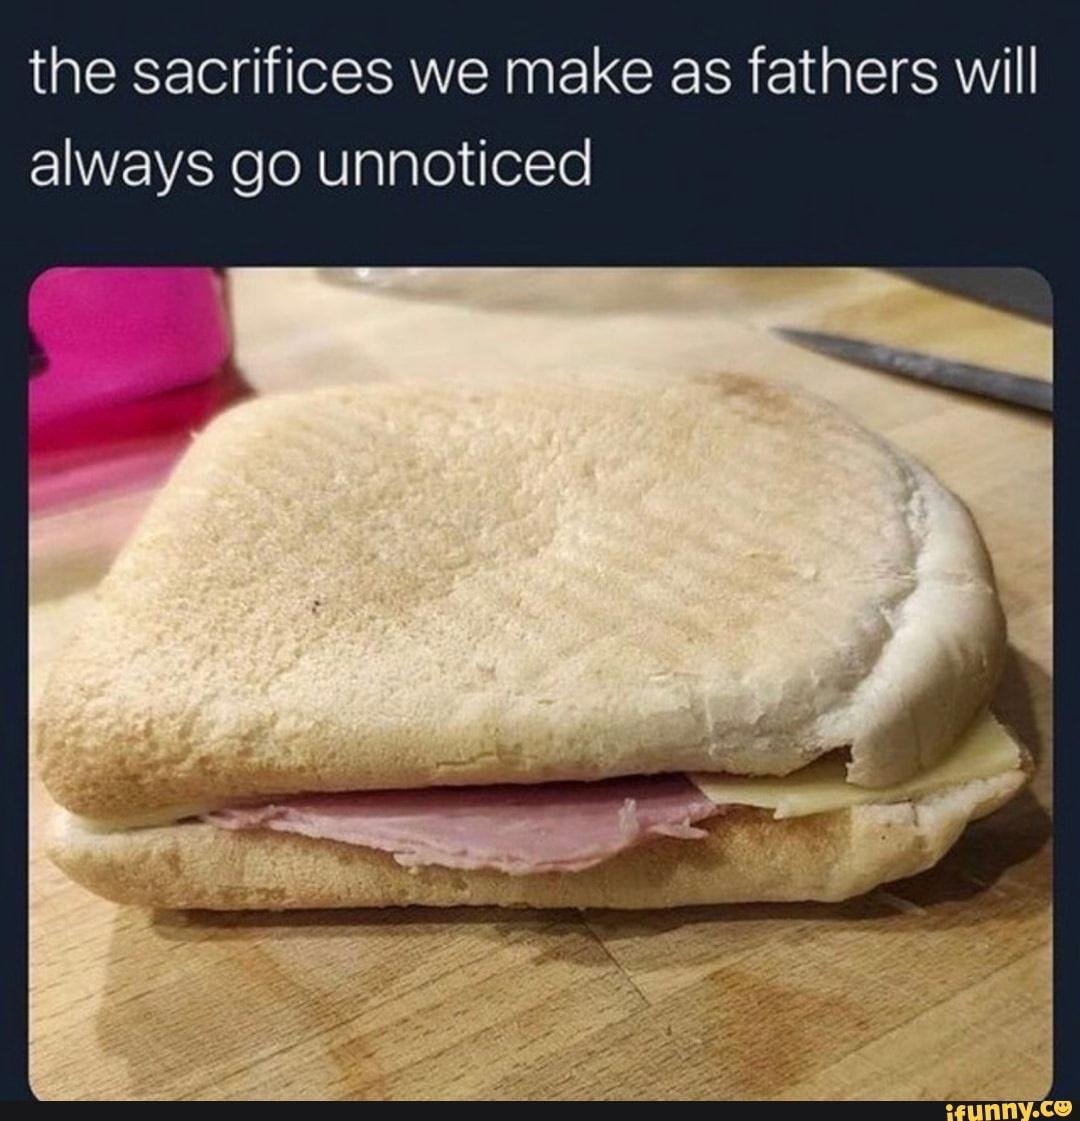 funny memes - breakfast sandwich - the sacrifices we make as fathers will always go unnoticed ifunny.co